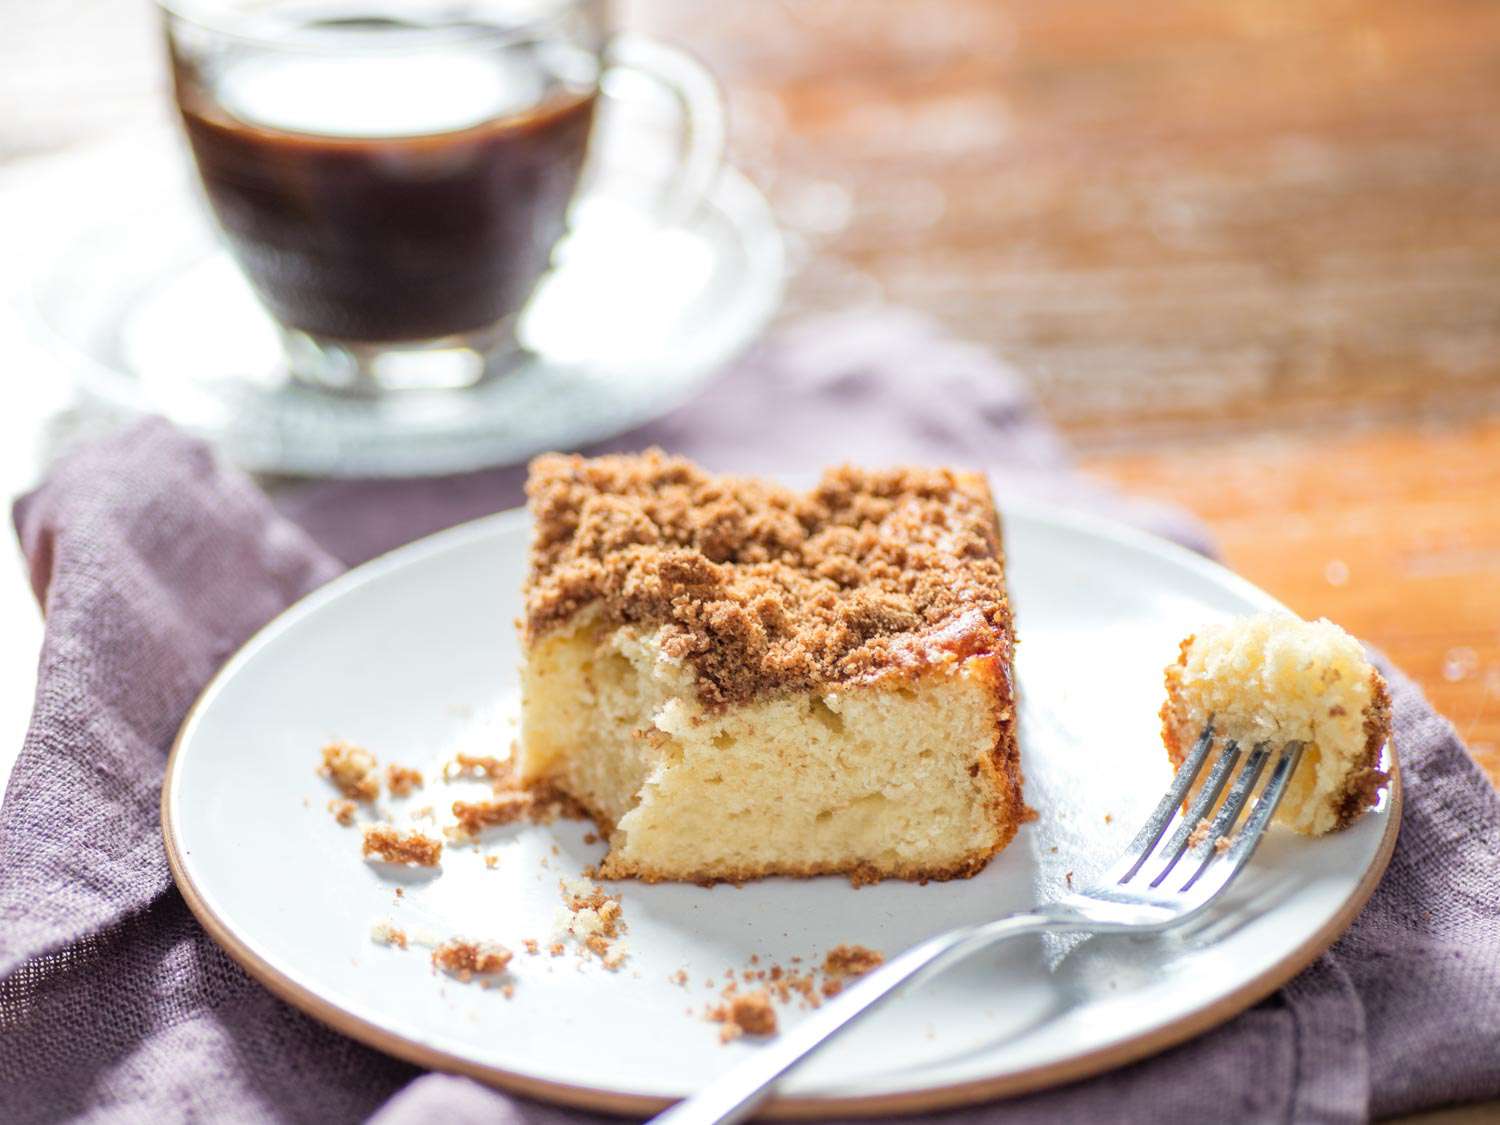 A piece of coffee cake on a serving plate; a fork has taken a corner of the cake out of it.